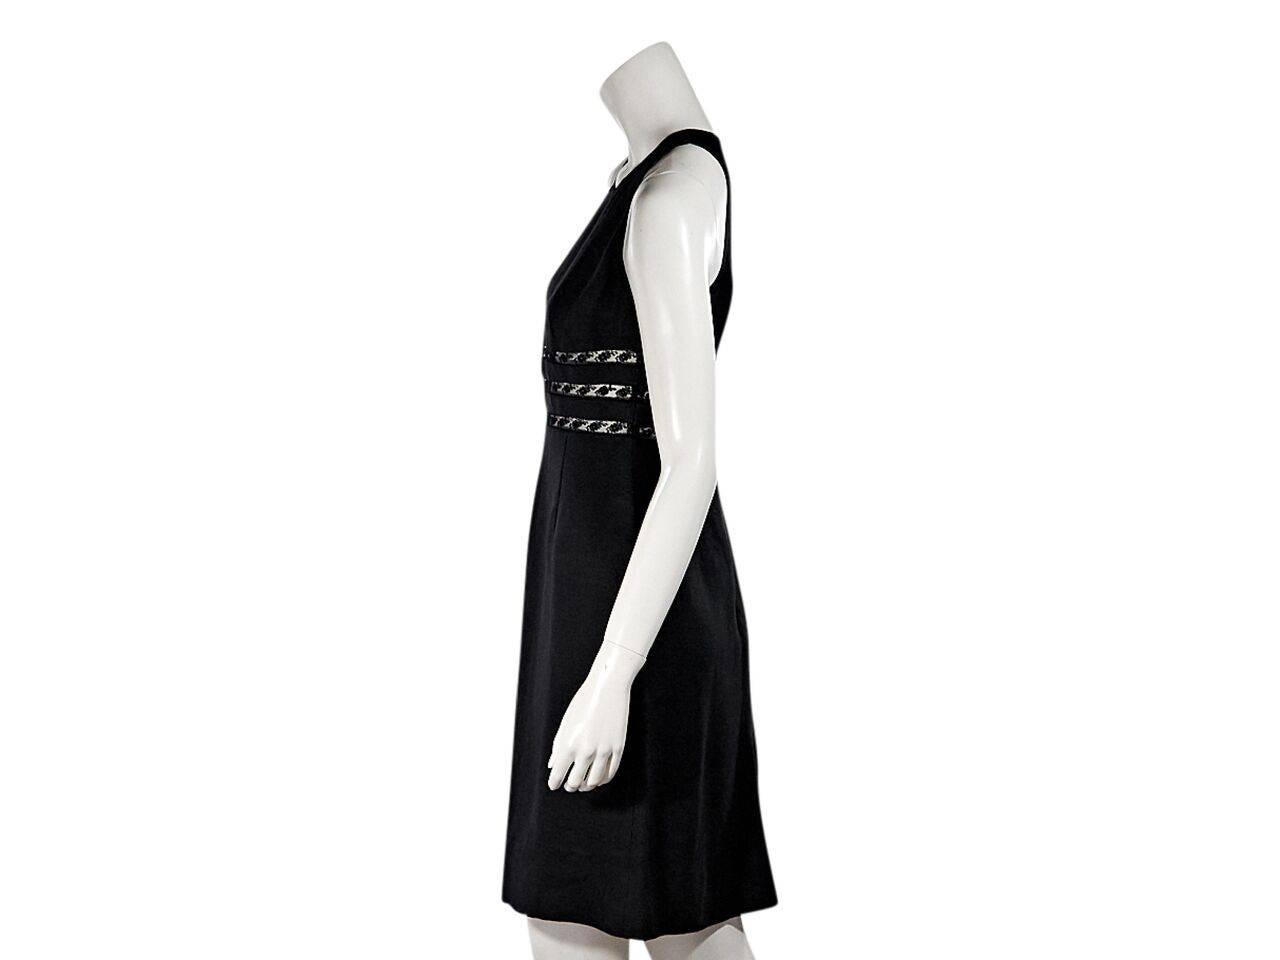 Product details:  Black lace-trimmed sheath dress by Valentino.  Roundneck.  Sleeveless.  Concealed back zip closure.  Designer size 40. bust is 28